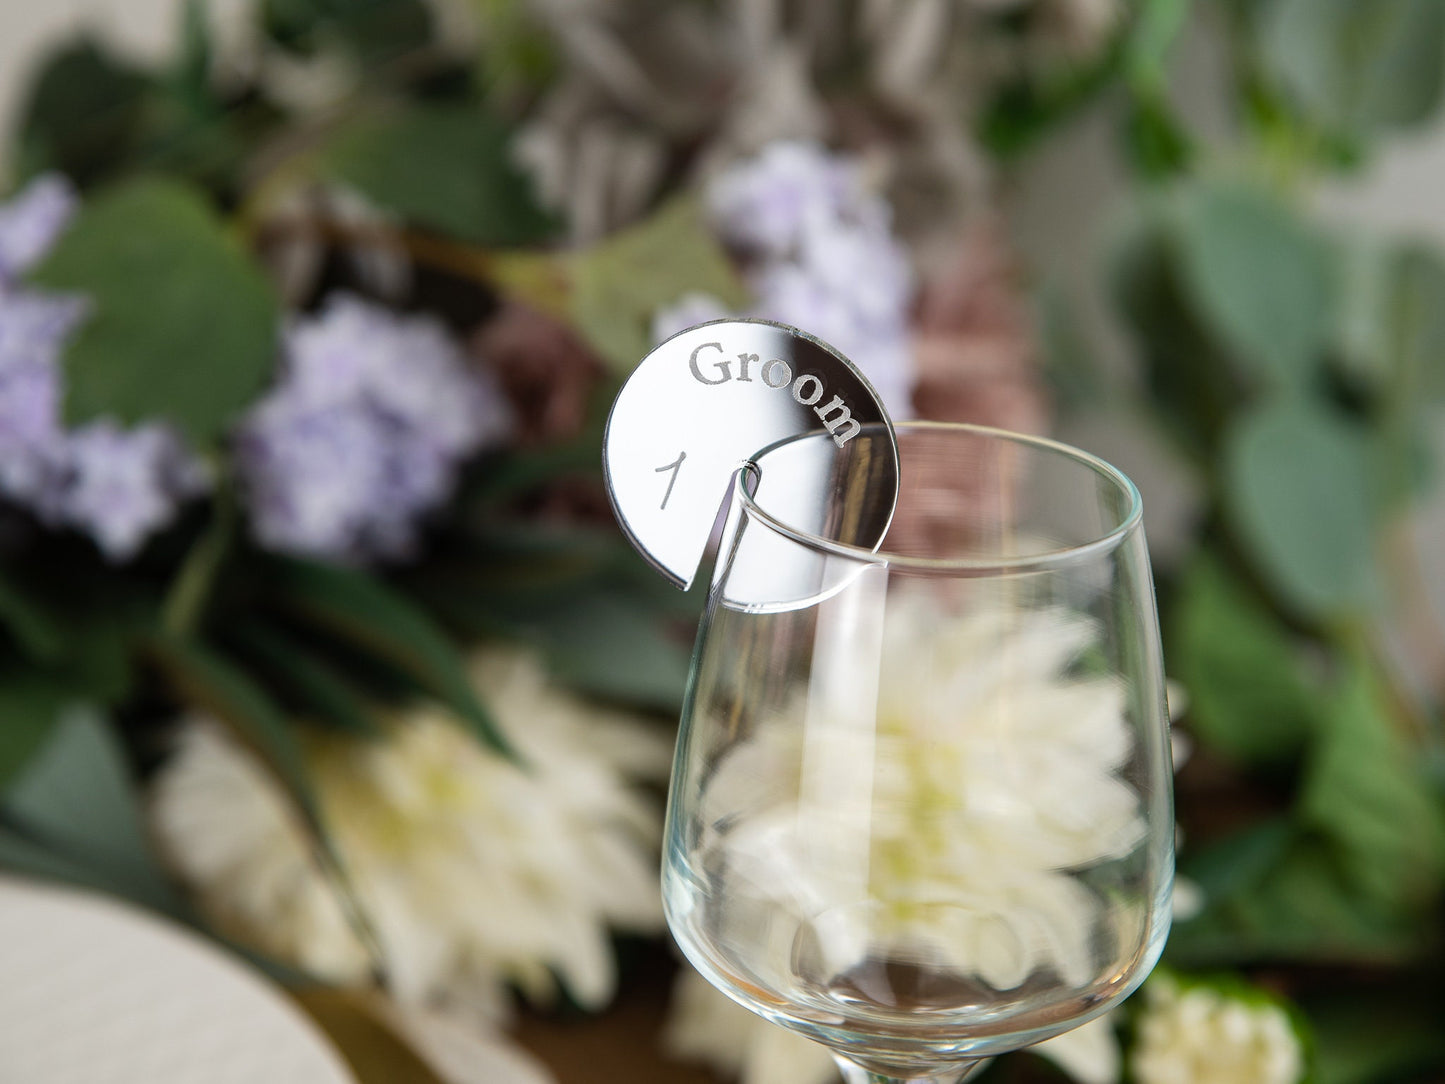 Acrylic Wedding Name Place Cards Ideas, Circle Place Names Wedding Favours, Disc Name Tags for Glass Place Setting Holder Drink Charm